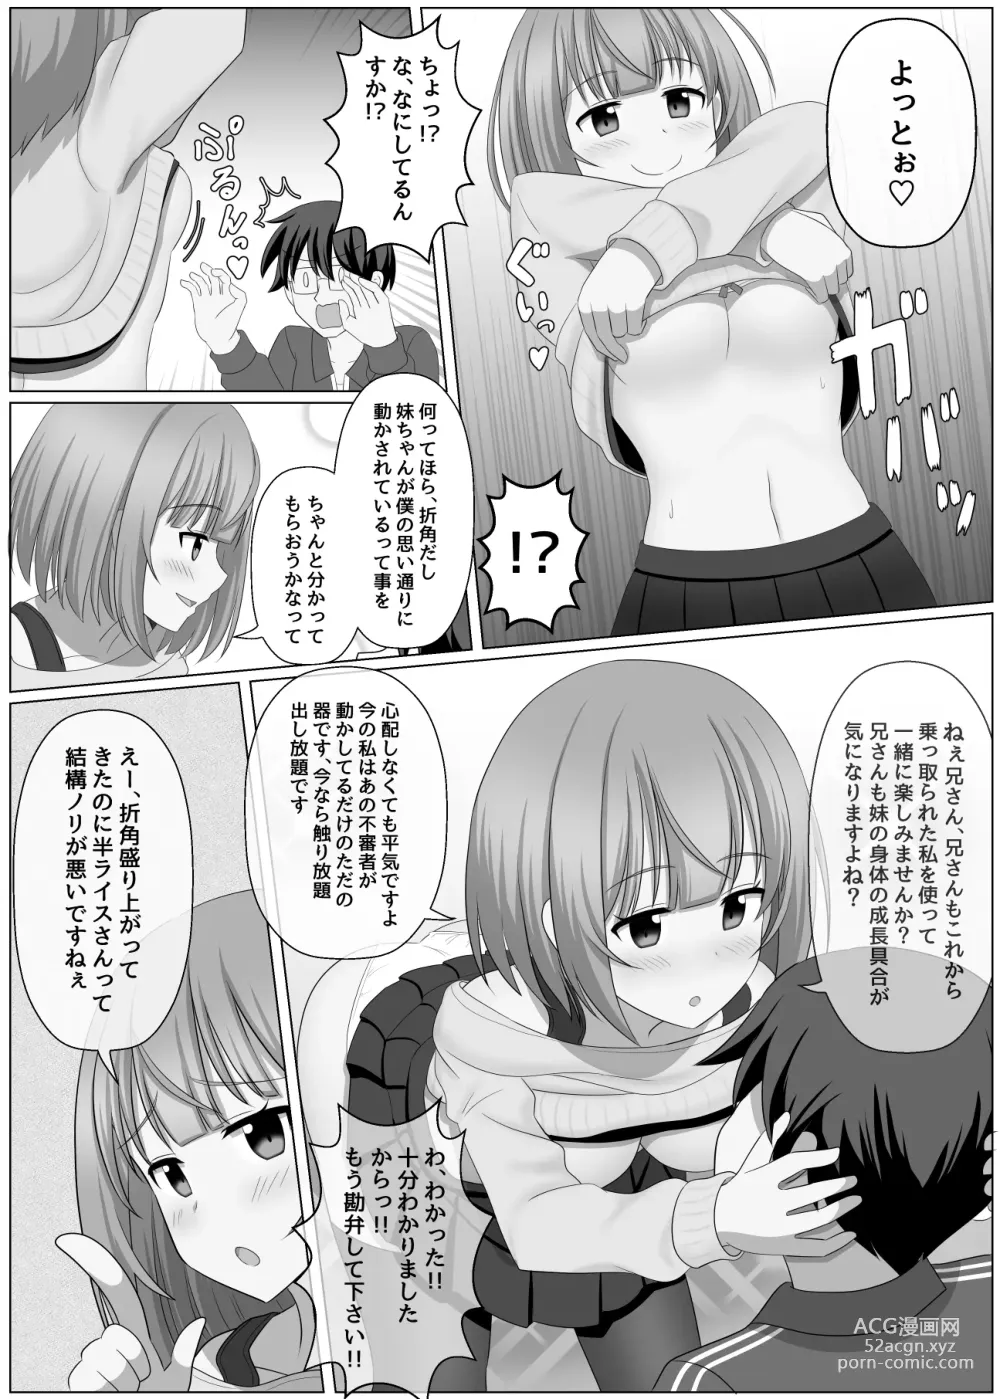 Page 7 of doujinshi Nottori Channel